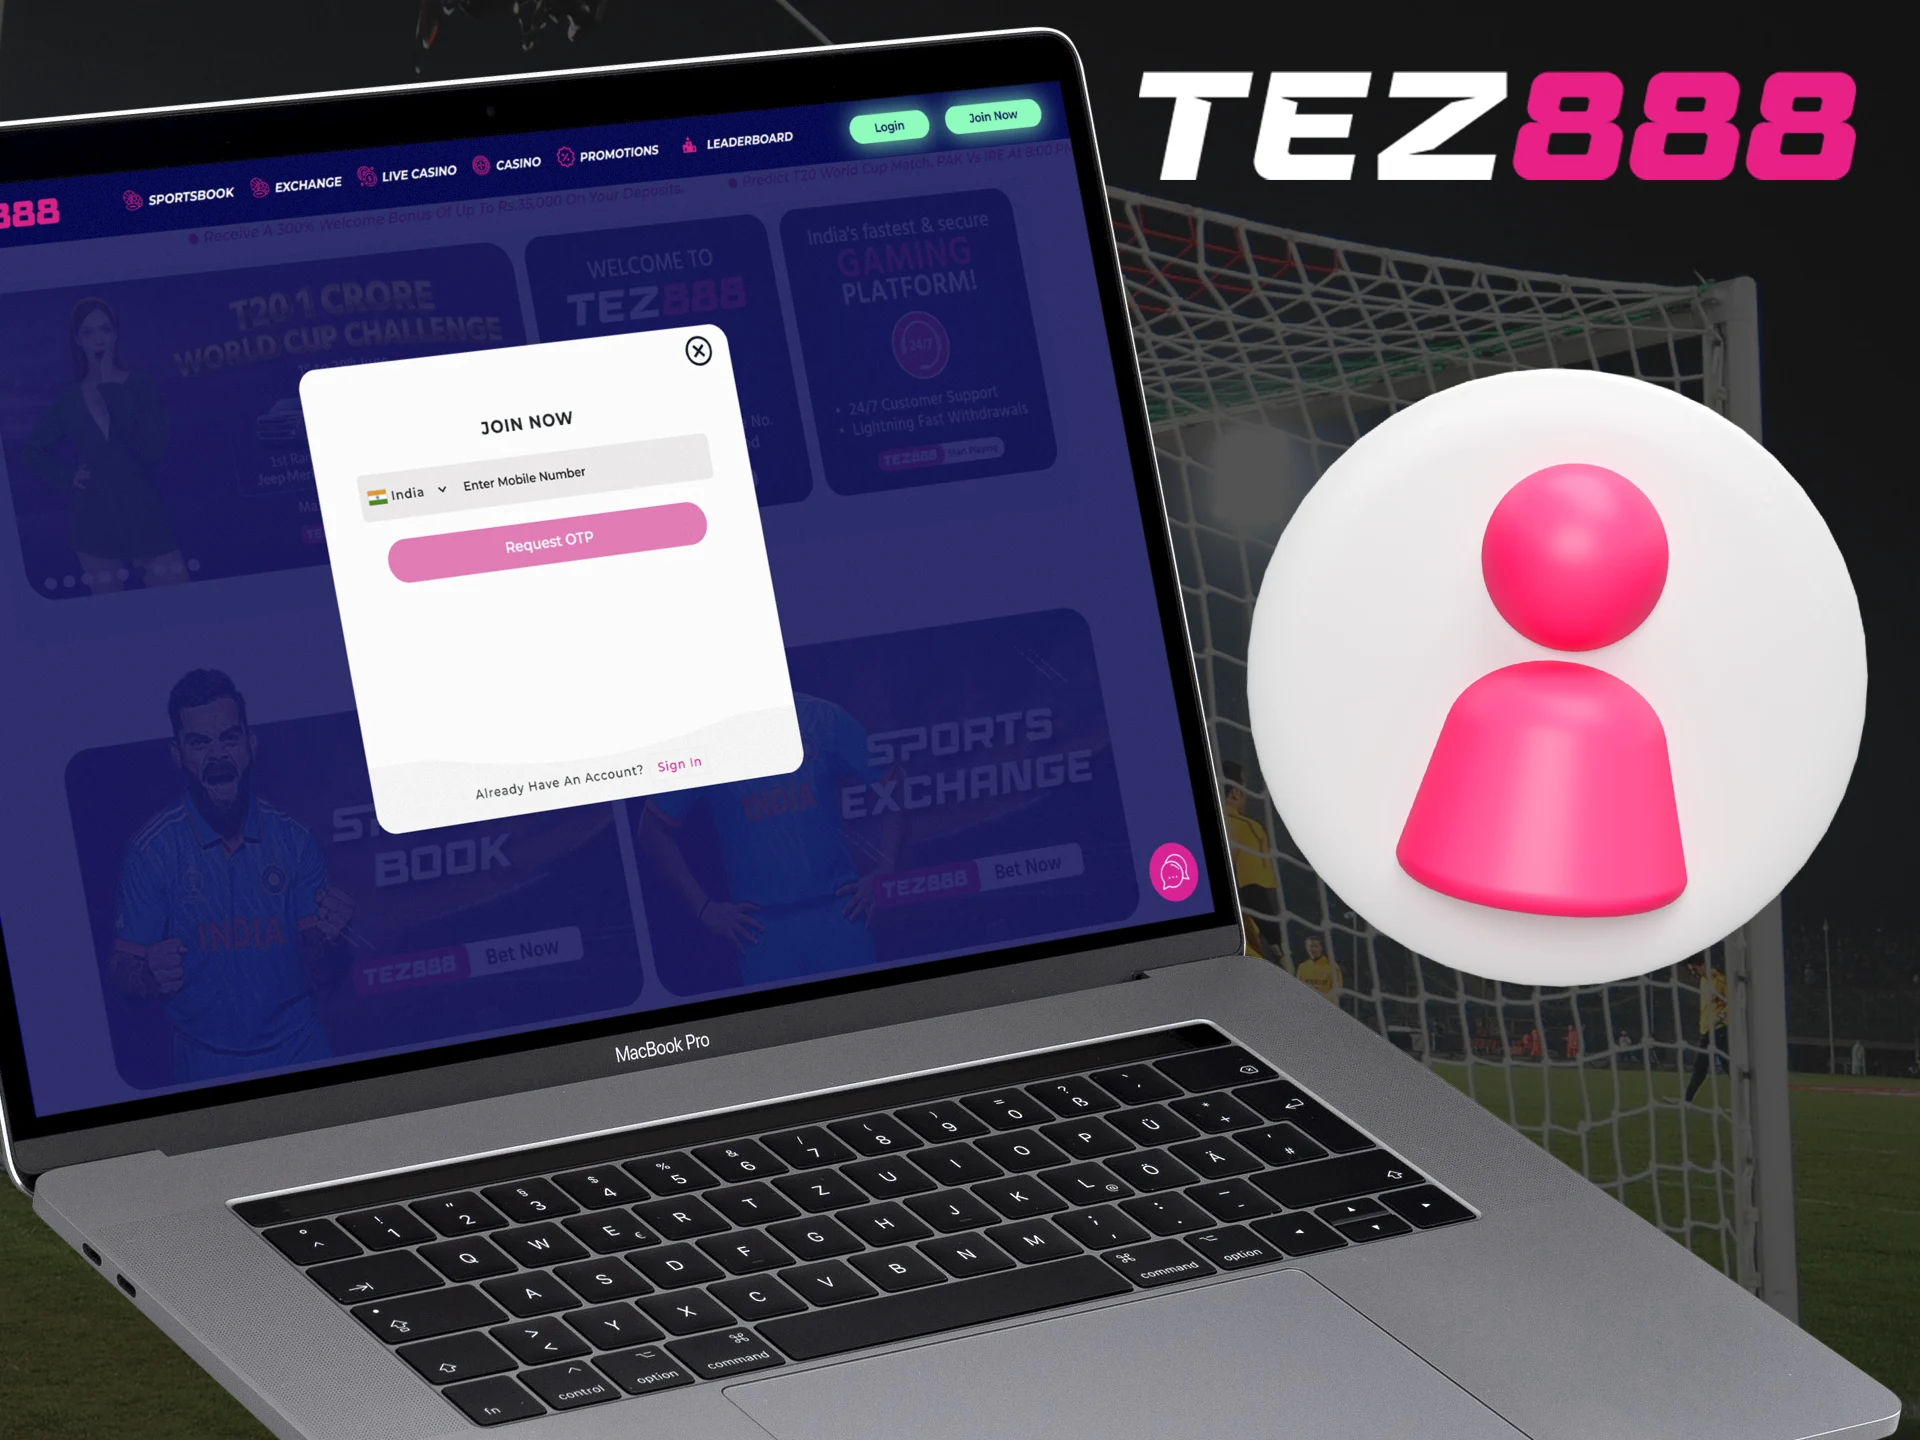 Signing up for Tez888 is simple and takes a couple of minutes.